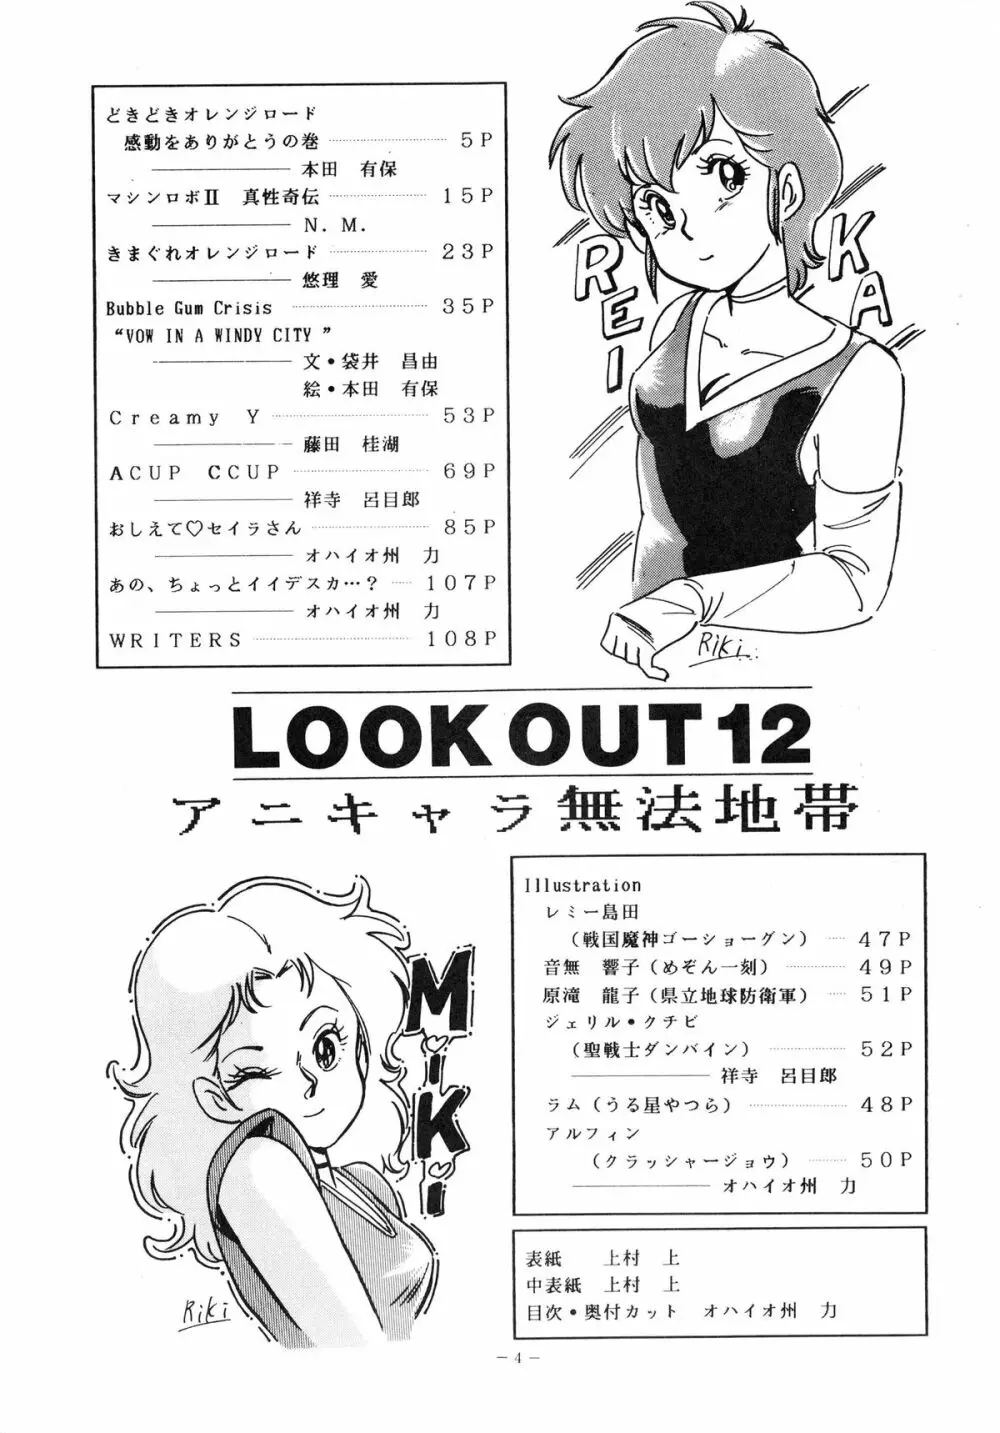 LOOK OUT 12 4ページ